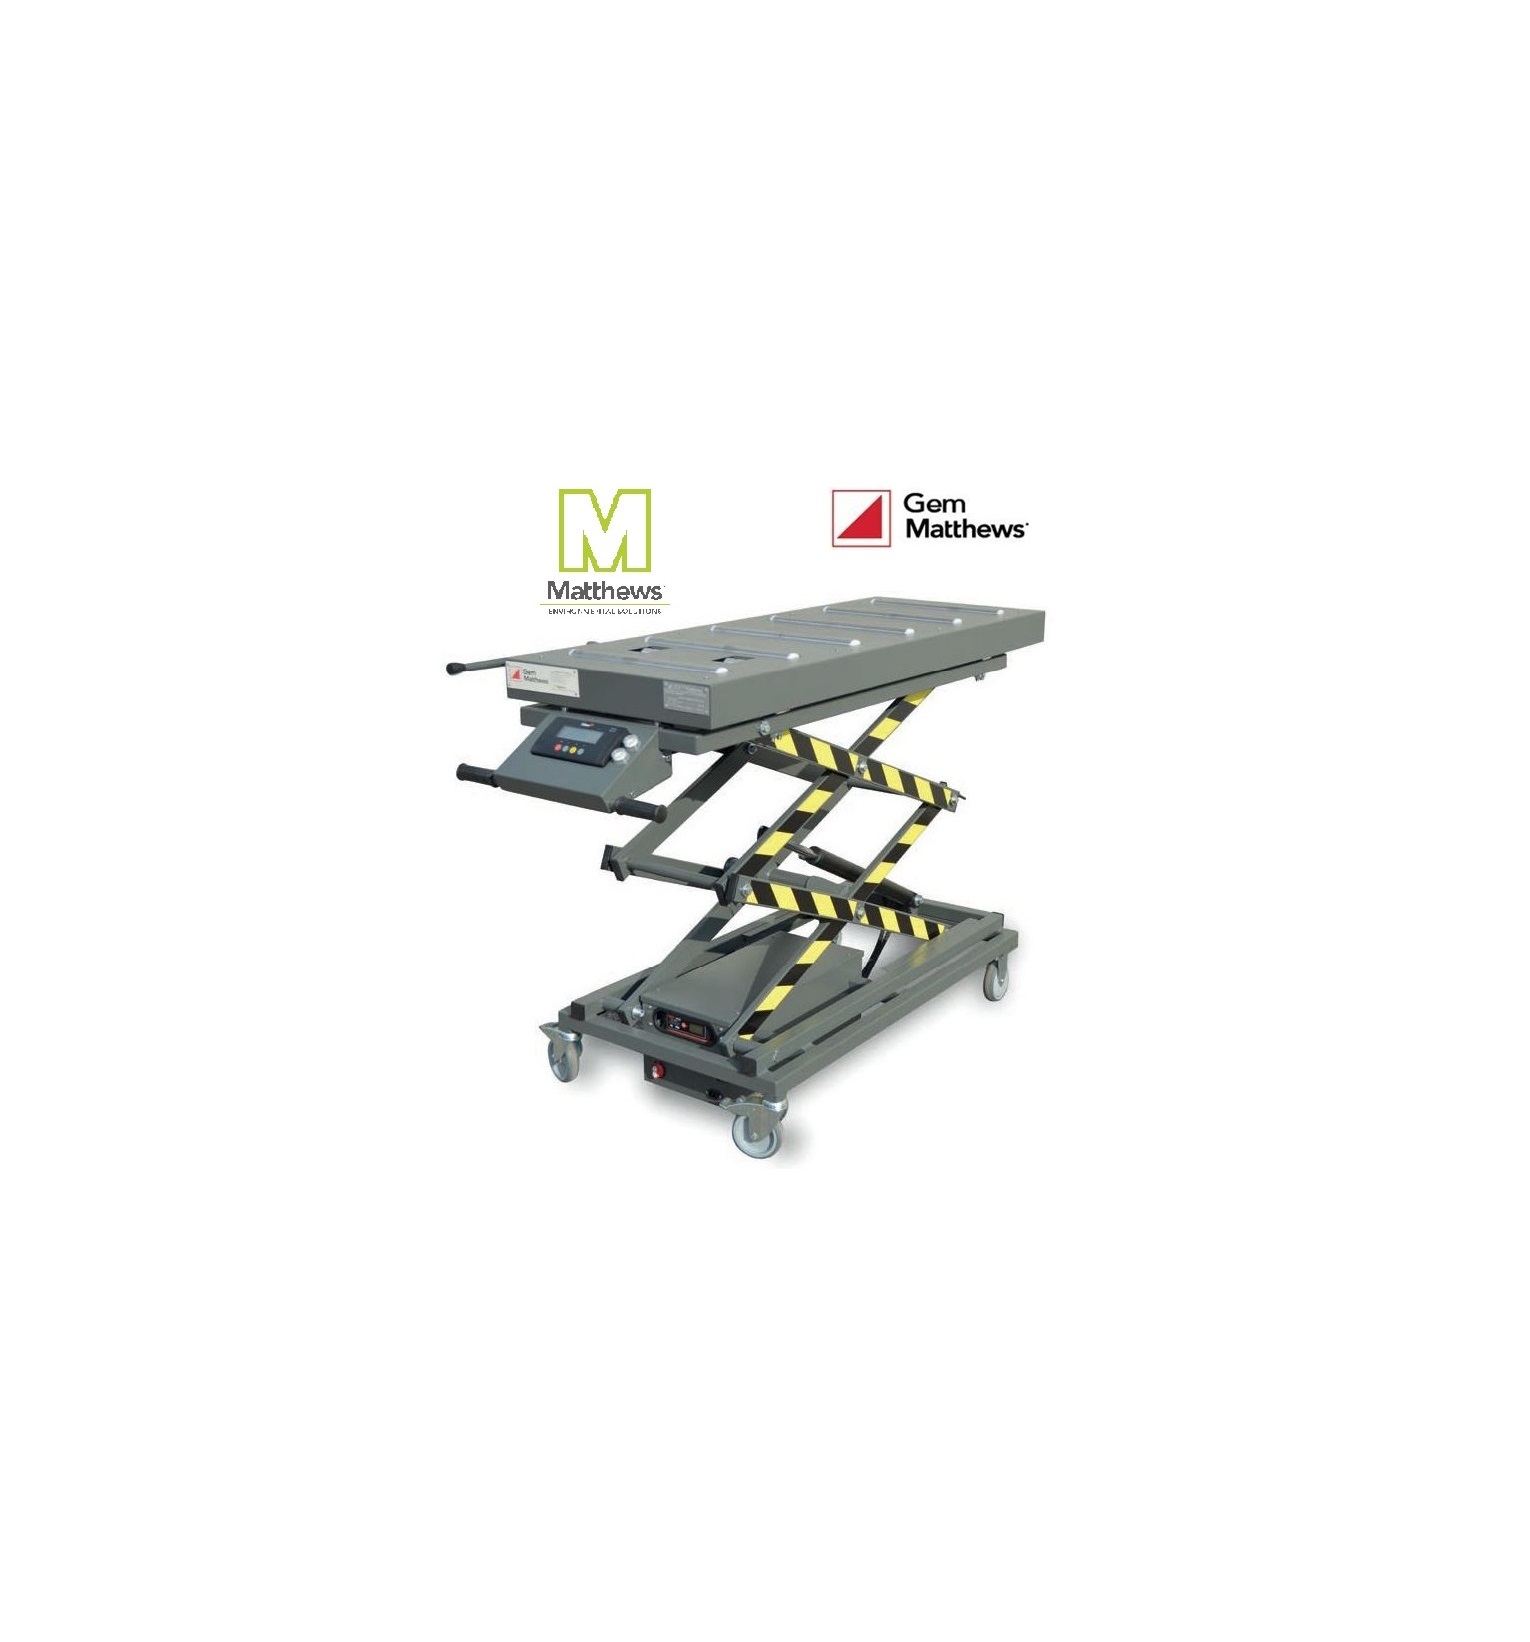 OFF SALES 2021 - Hydraulic lift table *offer valid while stocks last*